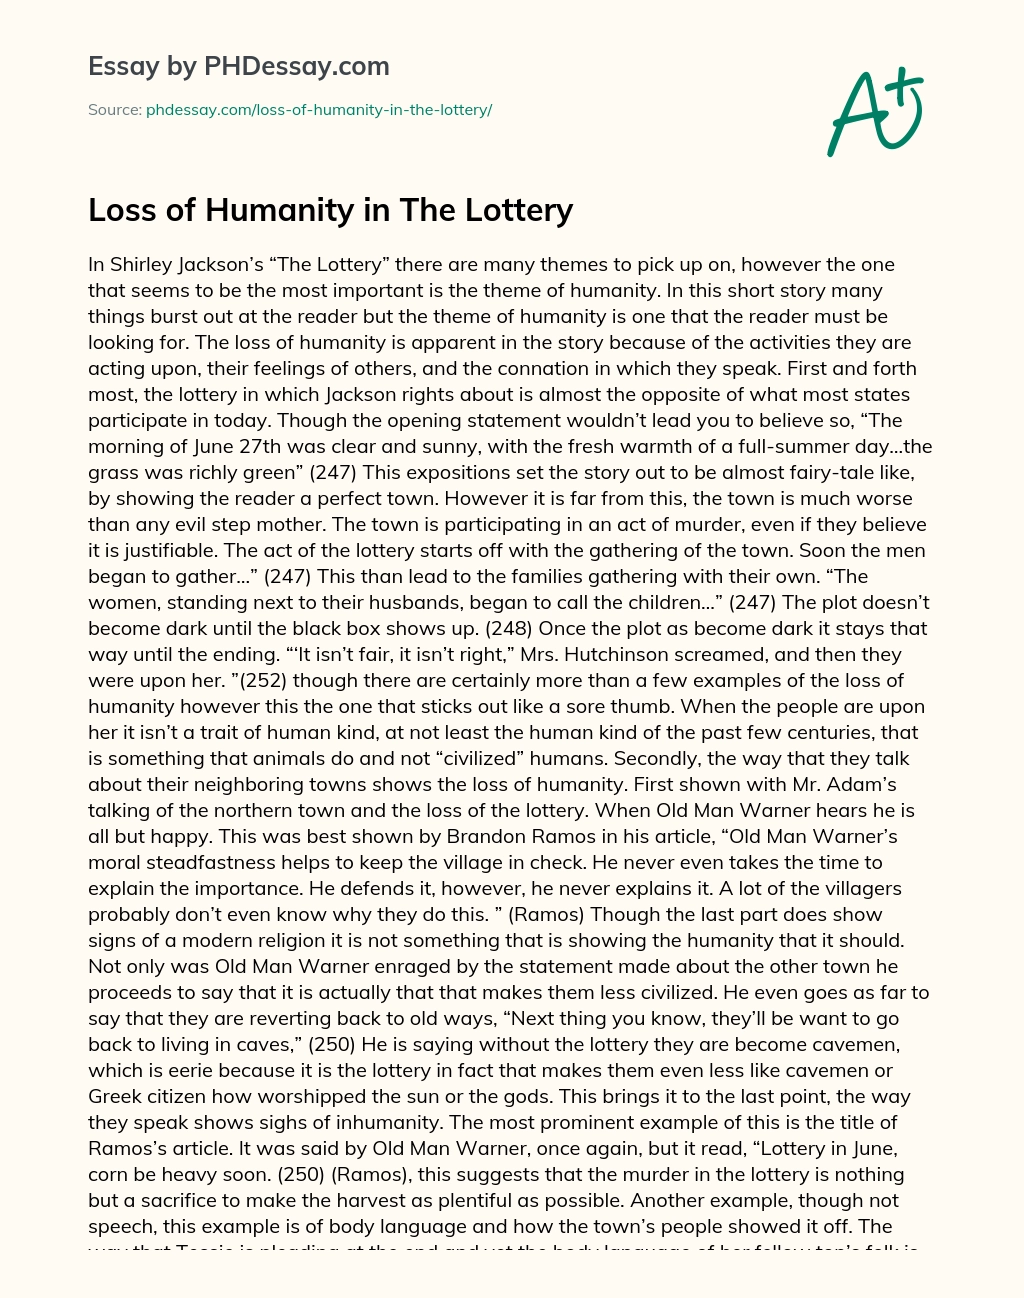 Loss of Humanity in The Lottery essay